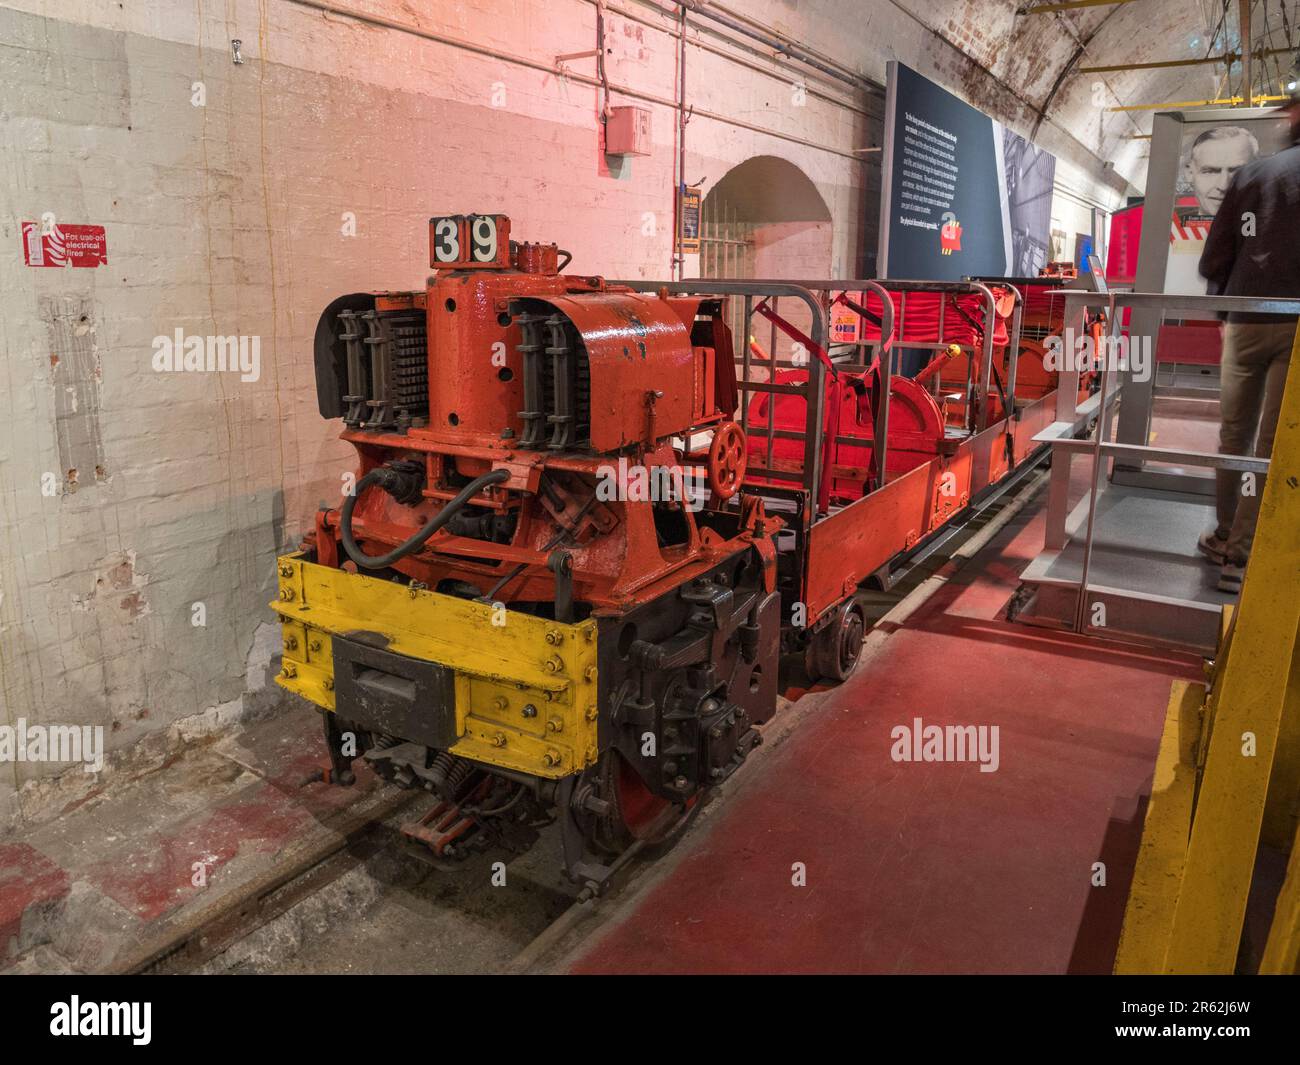 A 1930's rail car used to transport the mail on display in the Mail Rail Museum in London, UK. Stock Photo